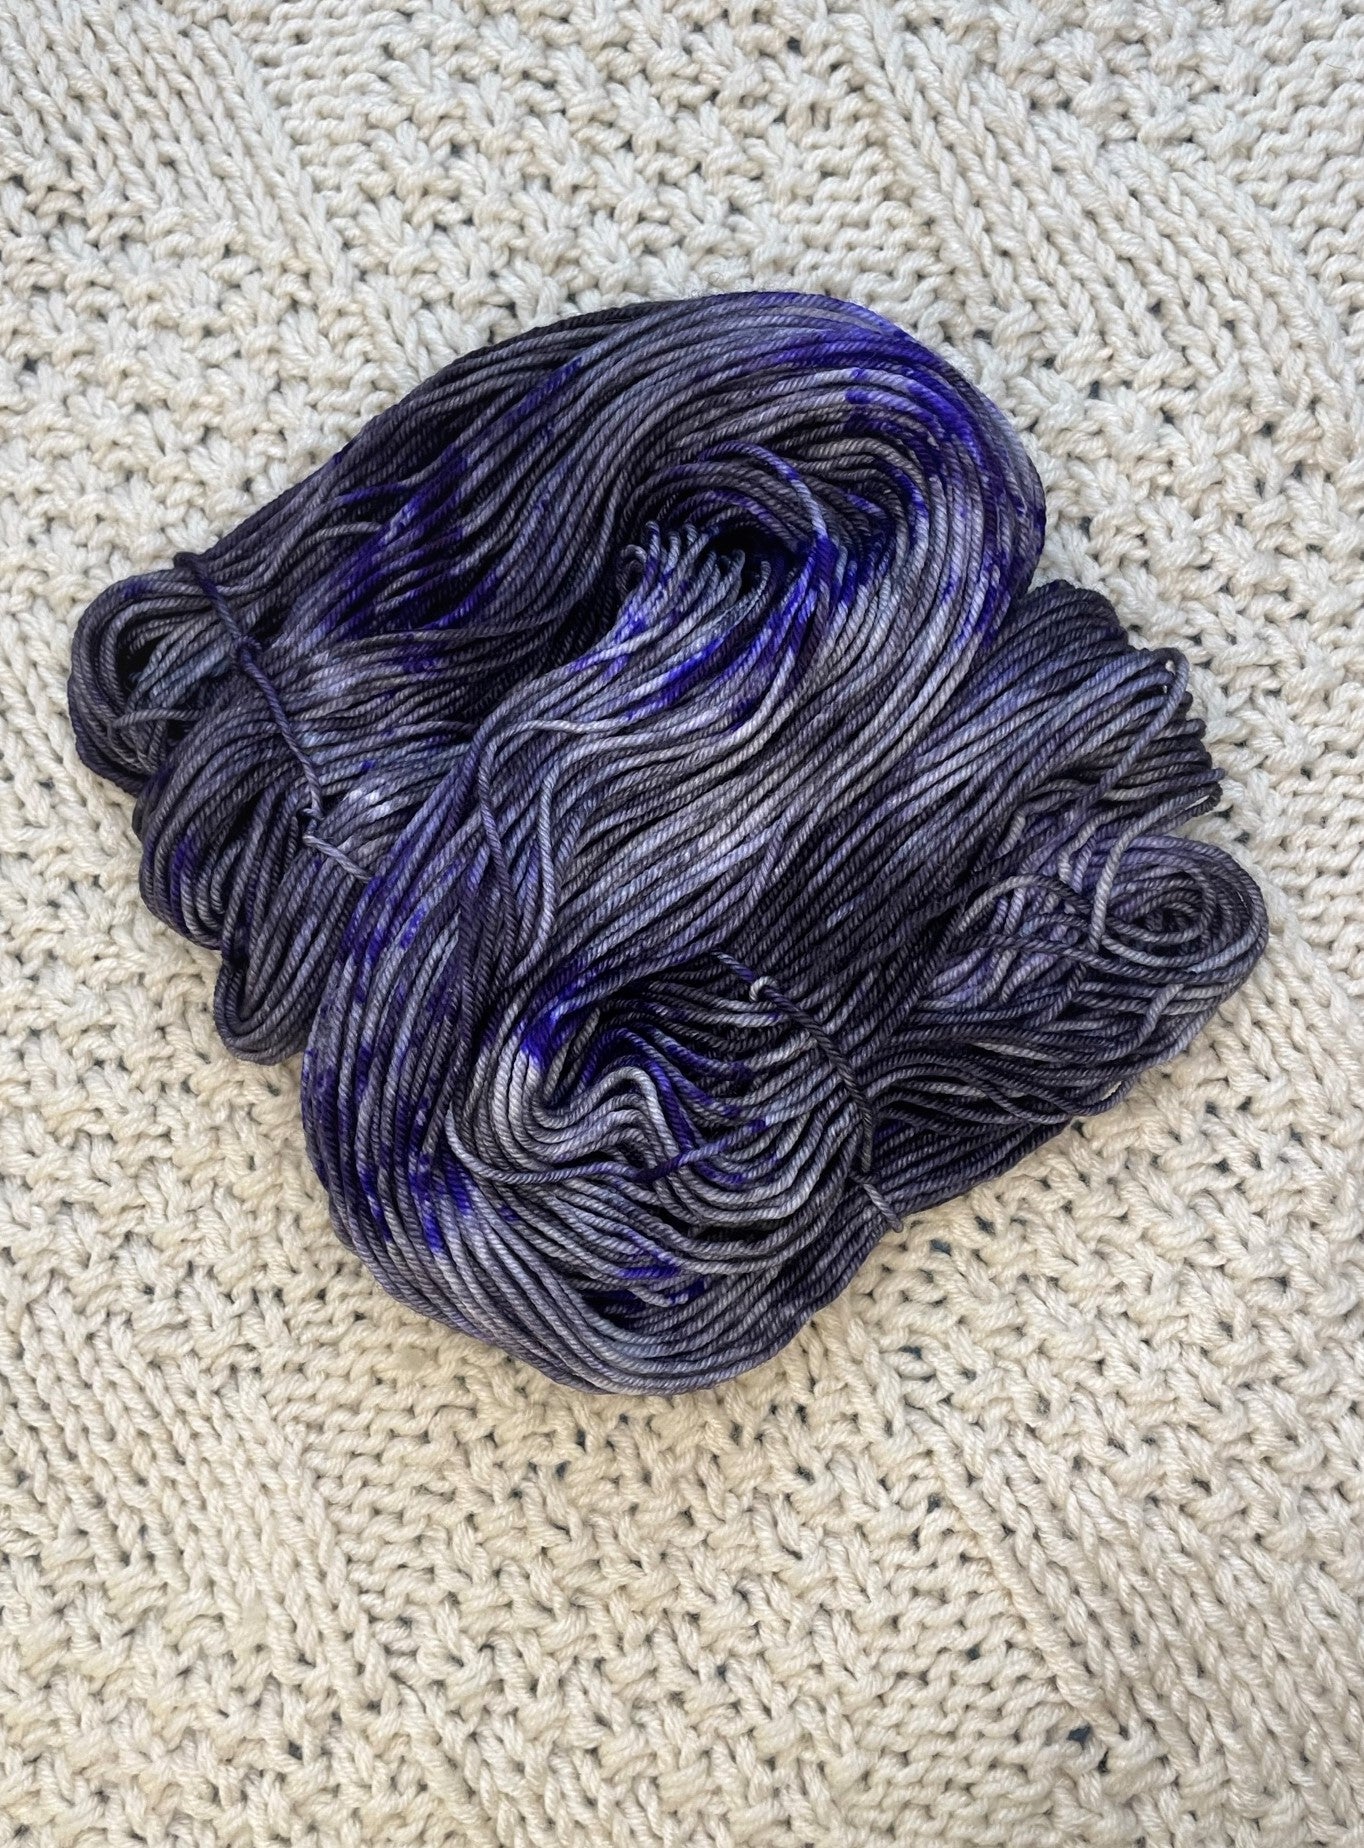 Sick Of It All - Hand Dyed SW DK Weight 100% Merino Yarn, 246 Yards (225 Meters)